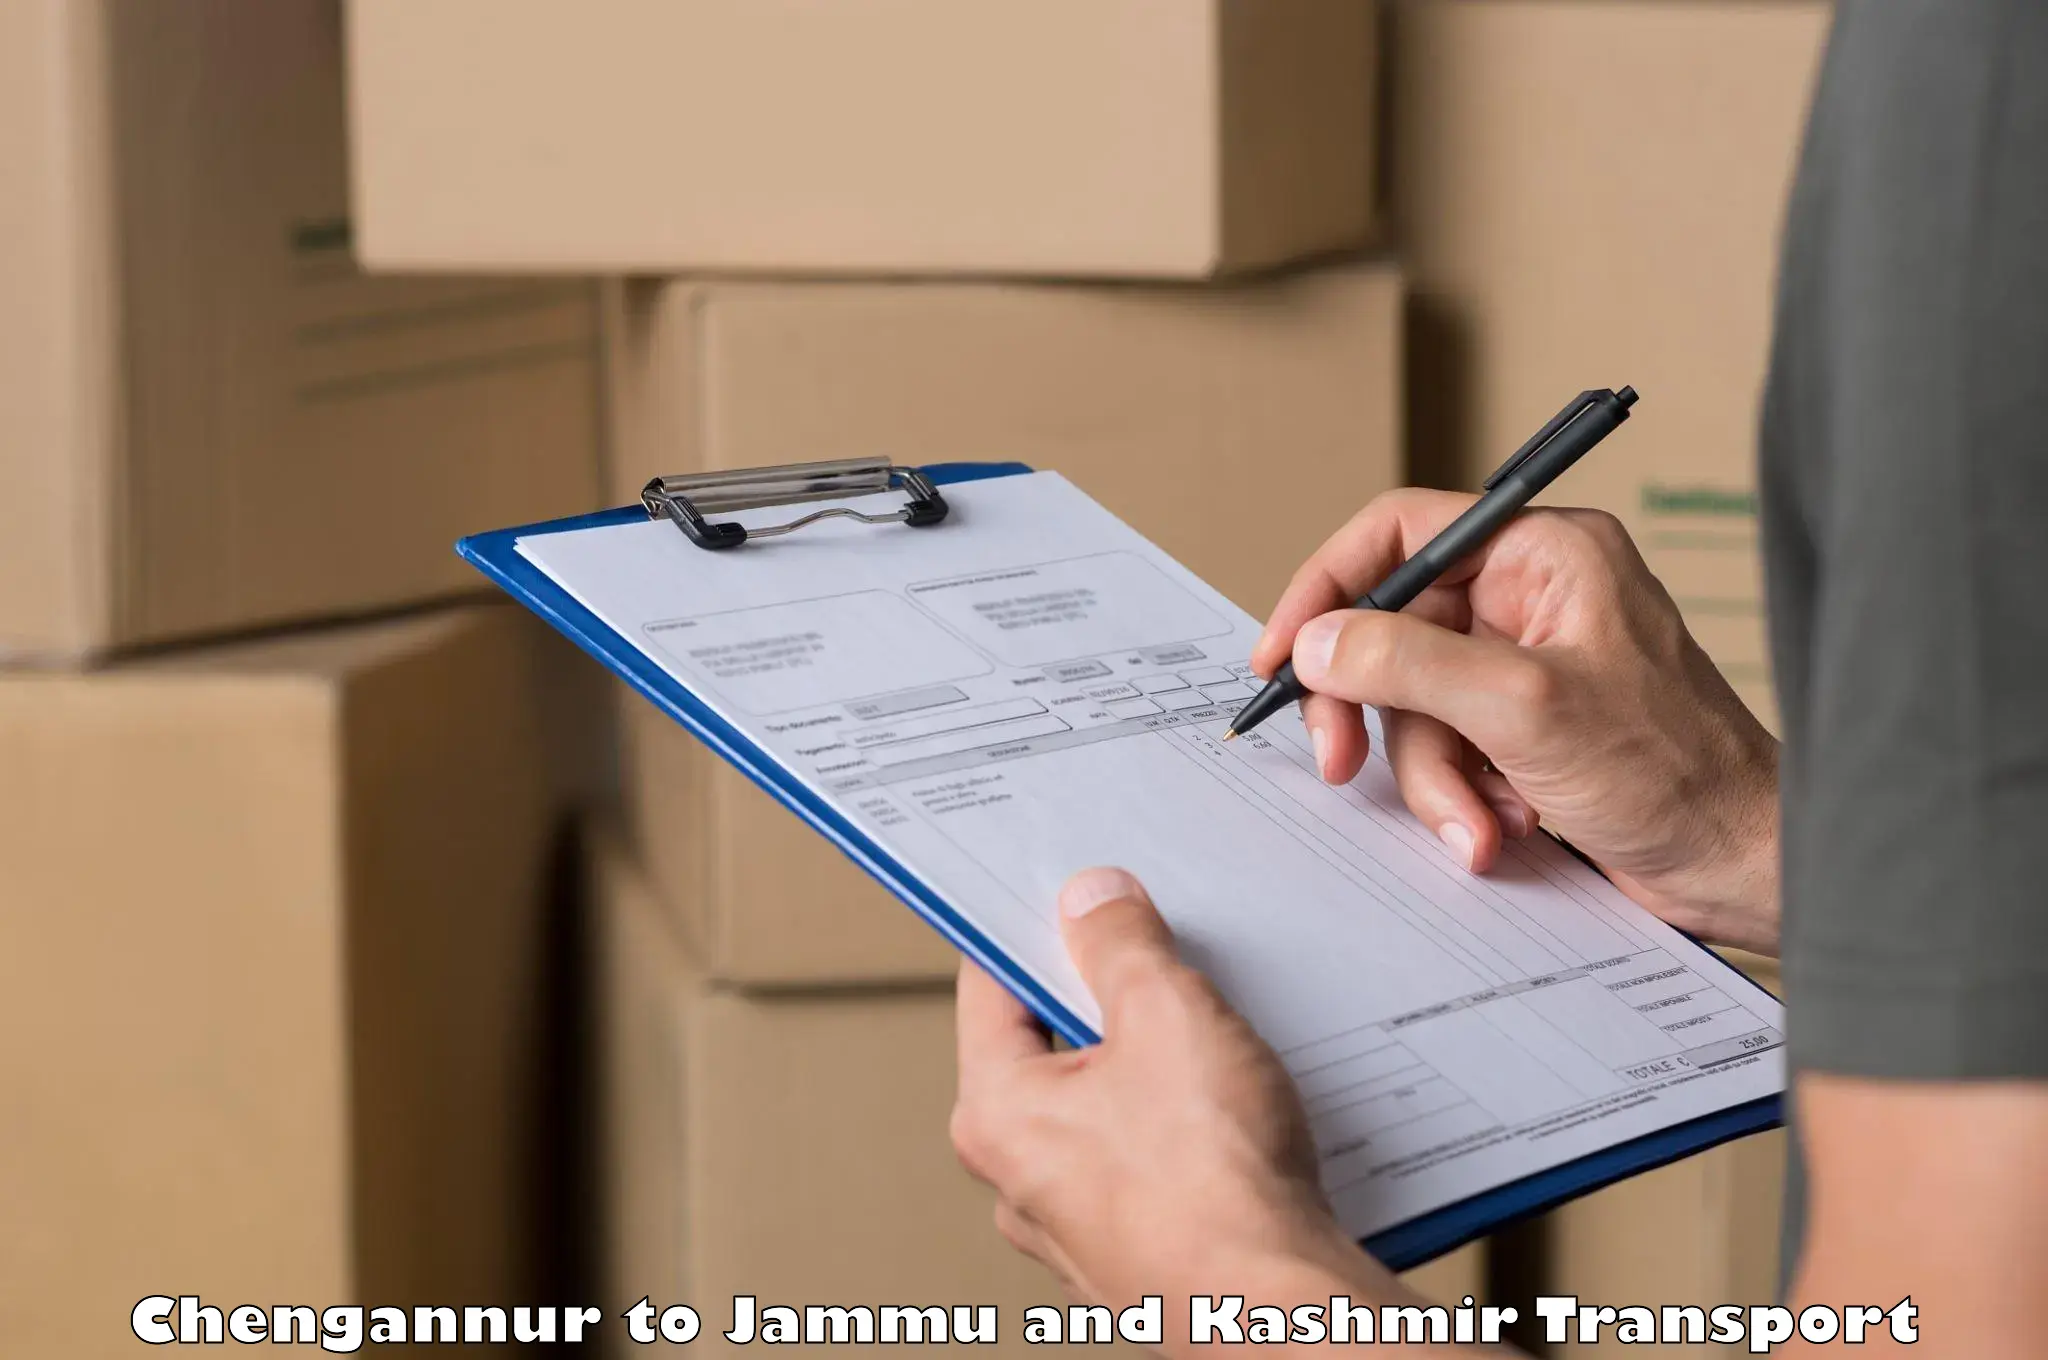 Nationwide transport services Chengannur to University of Jammu